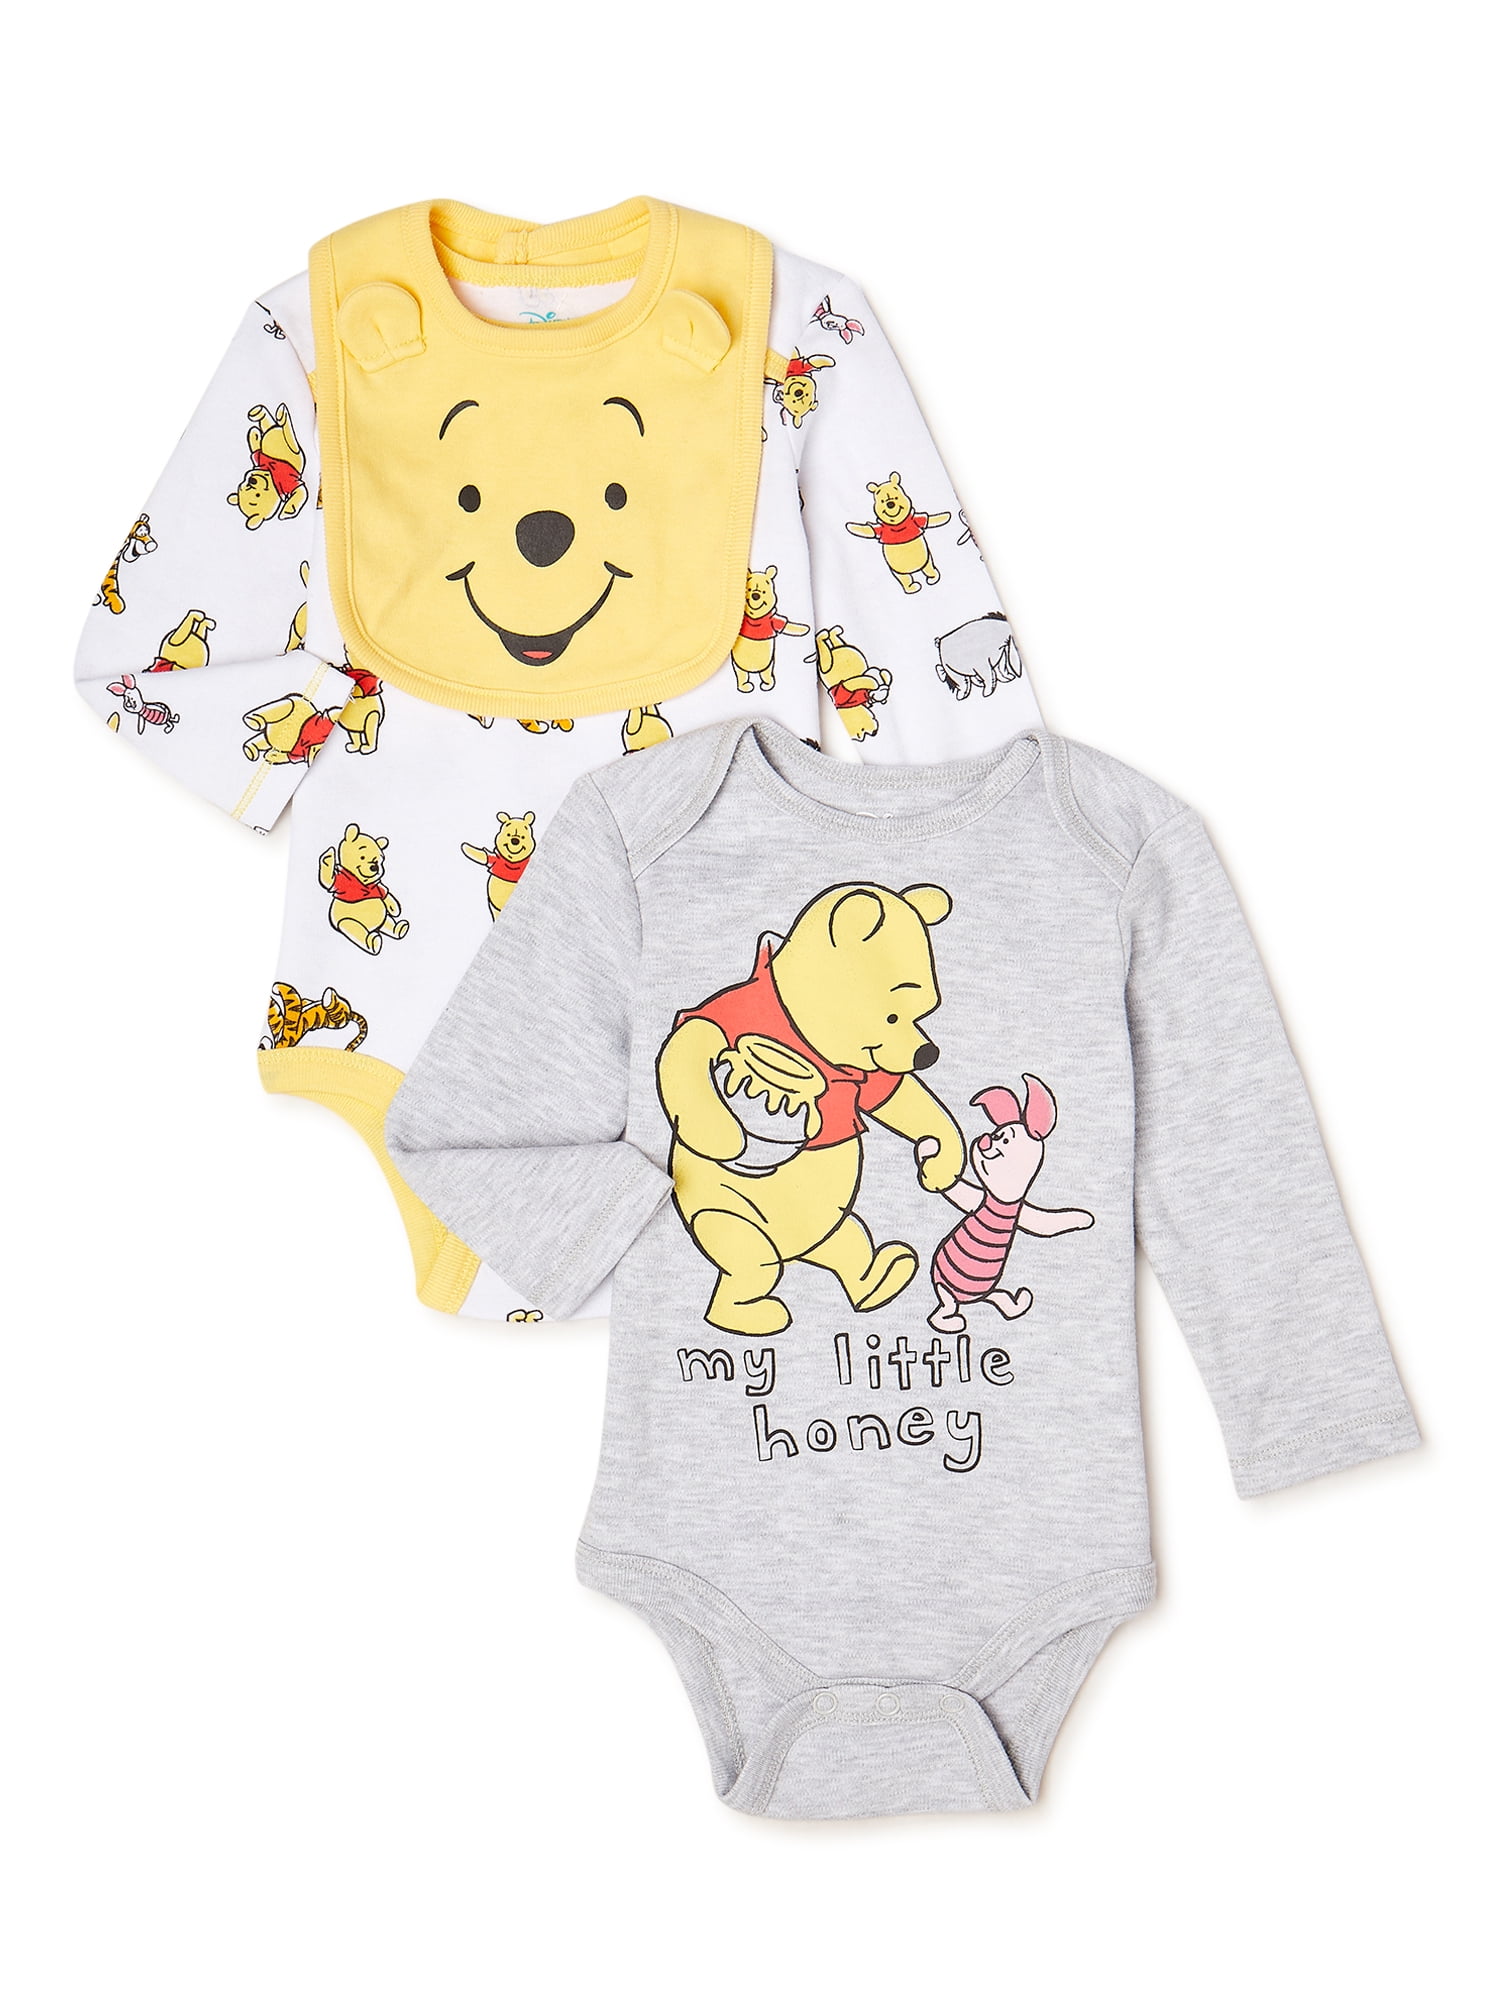 New With Tags. 0-3 Months Baby Gap Long Sleeve Bodysuit Set 